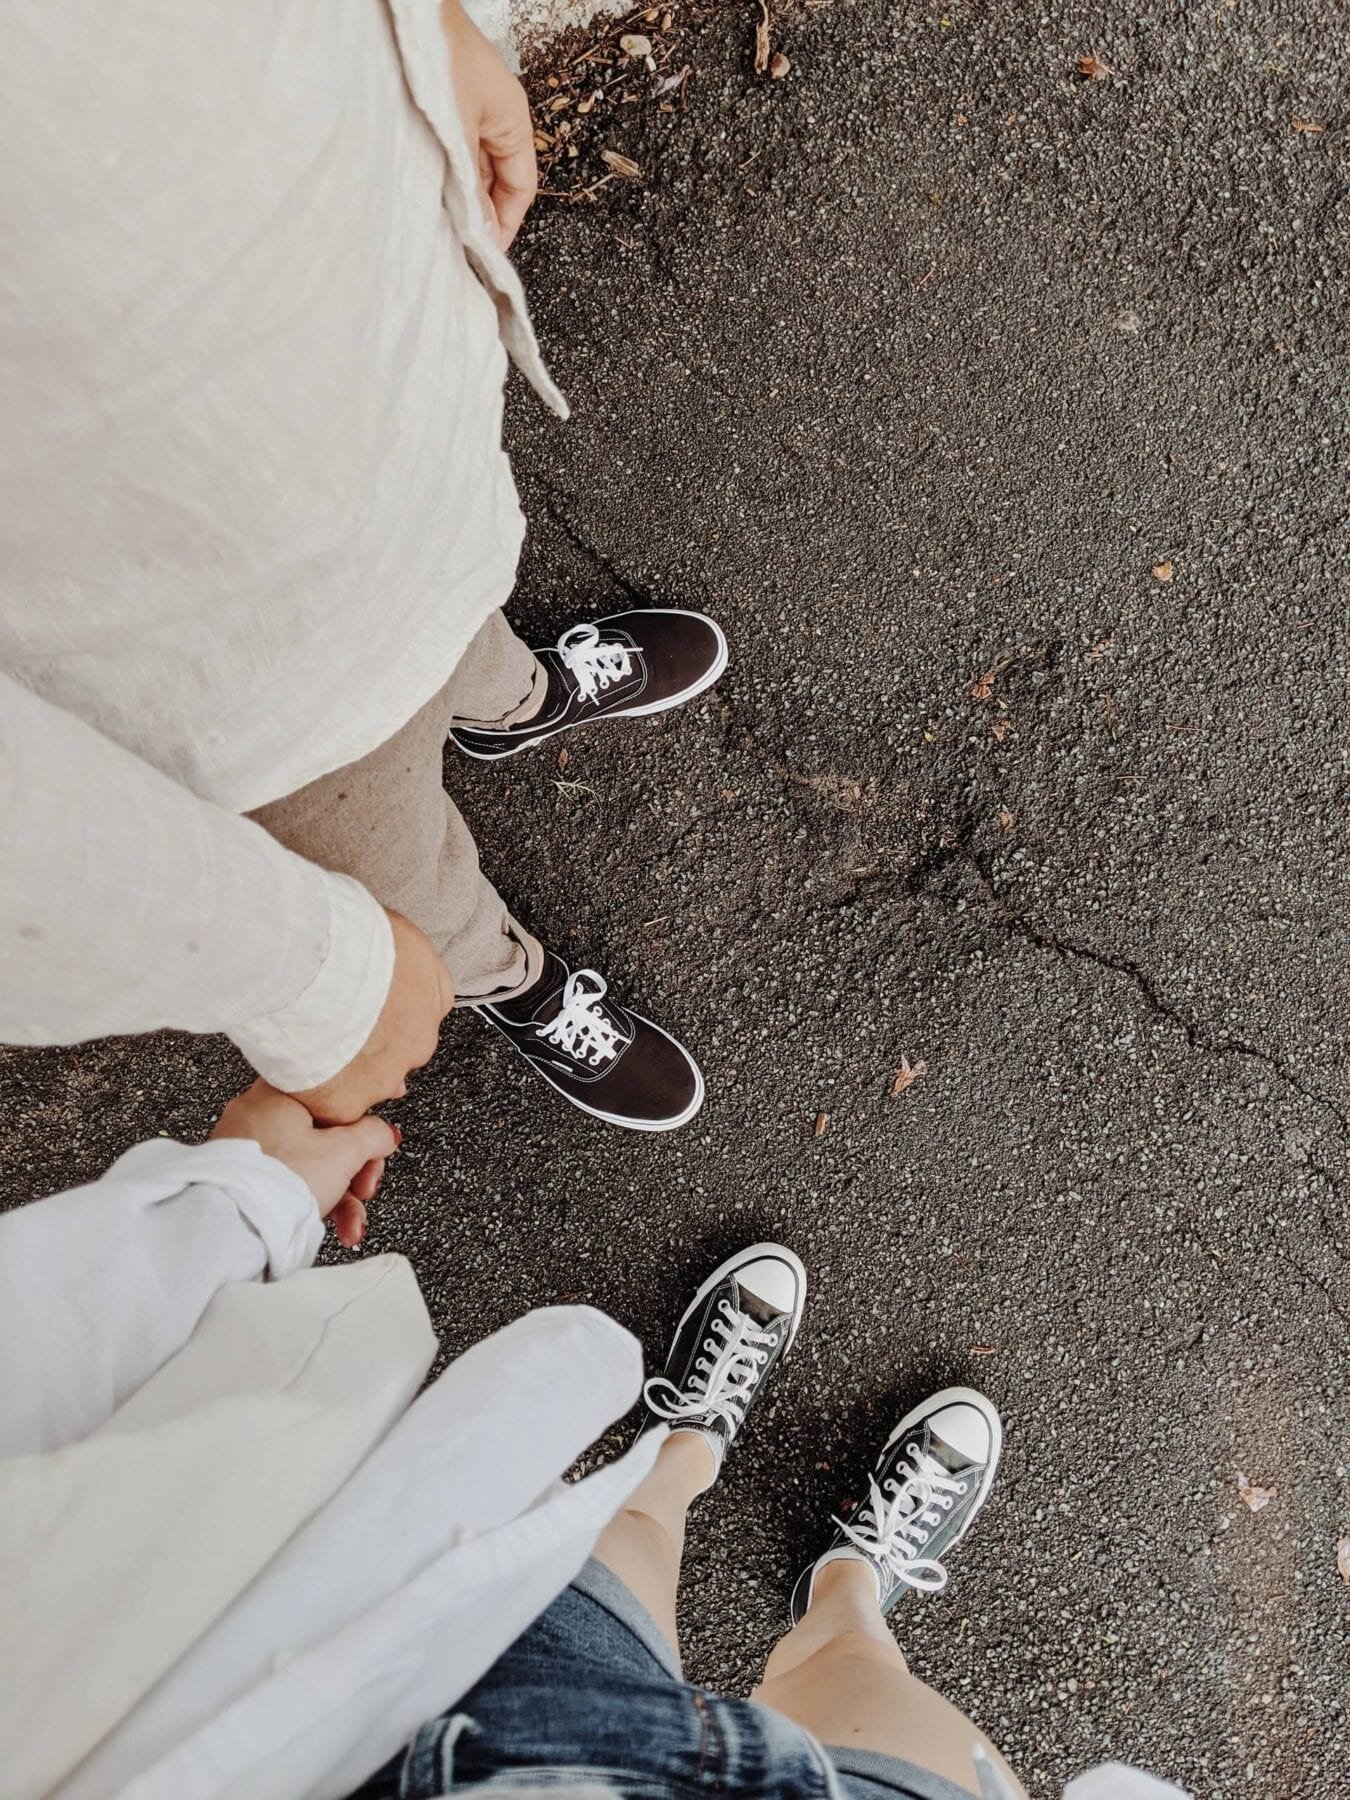 People in Black and White Sneakers